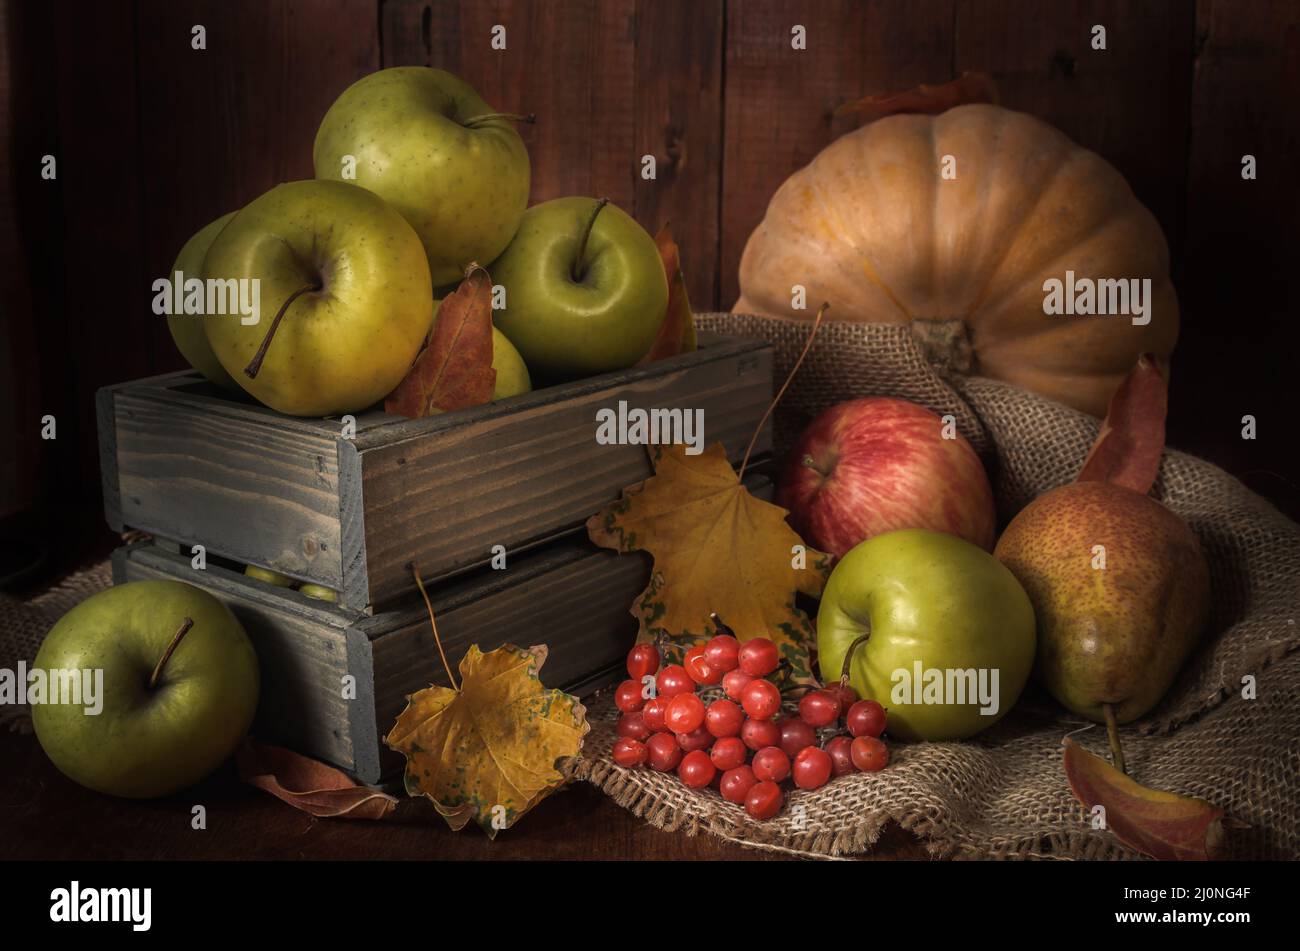 Apples and other foods on a dark wooden background in a rustic style Stock Photo